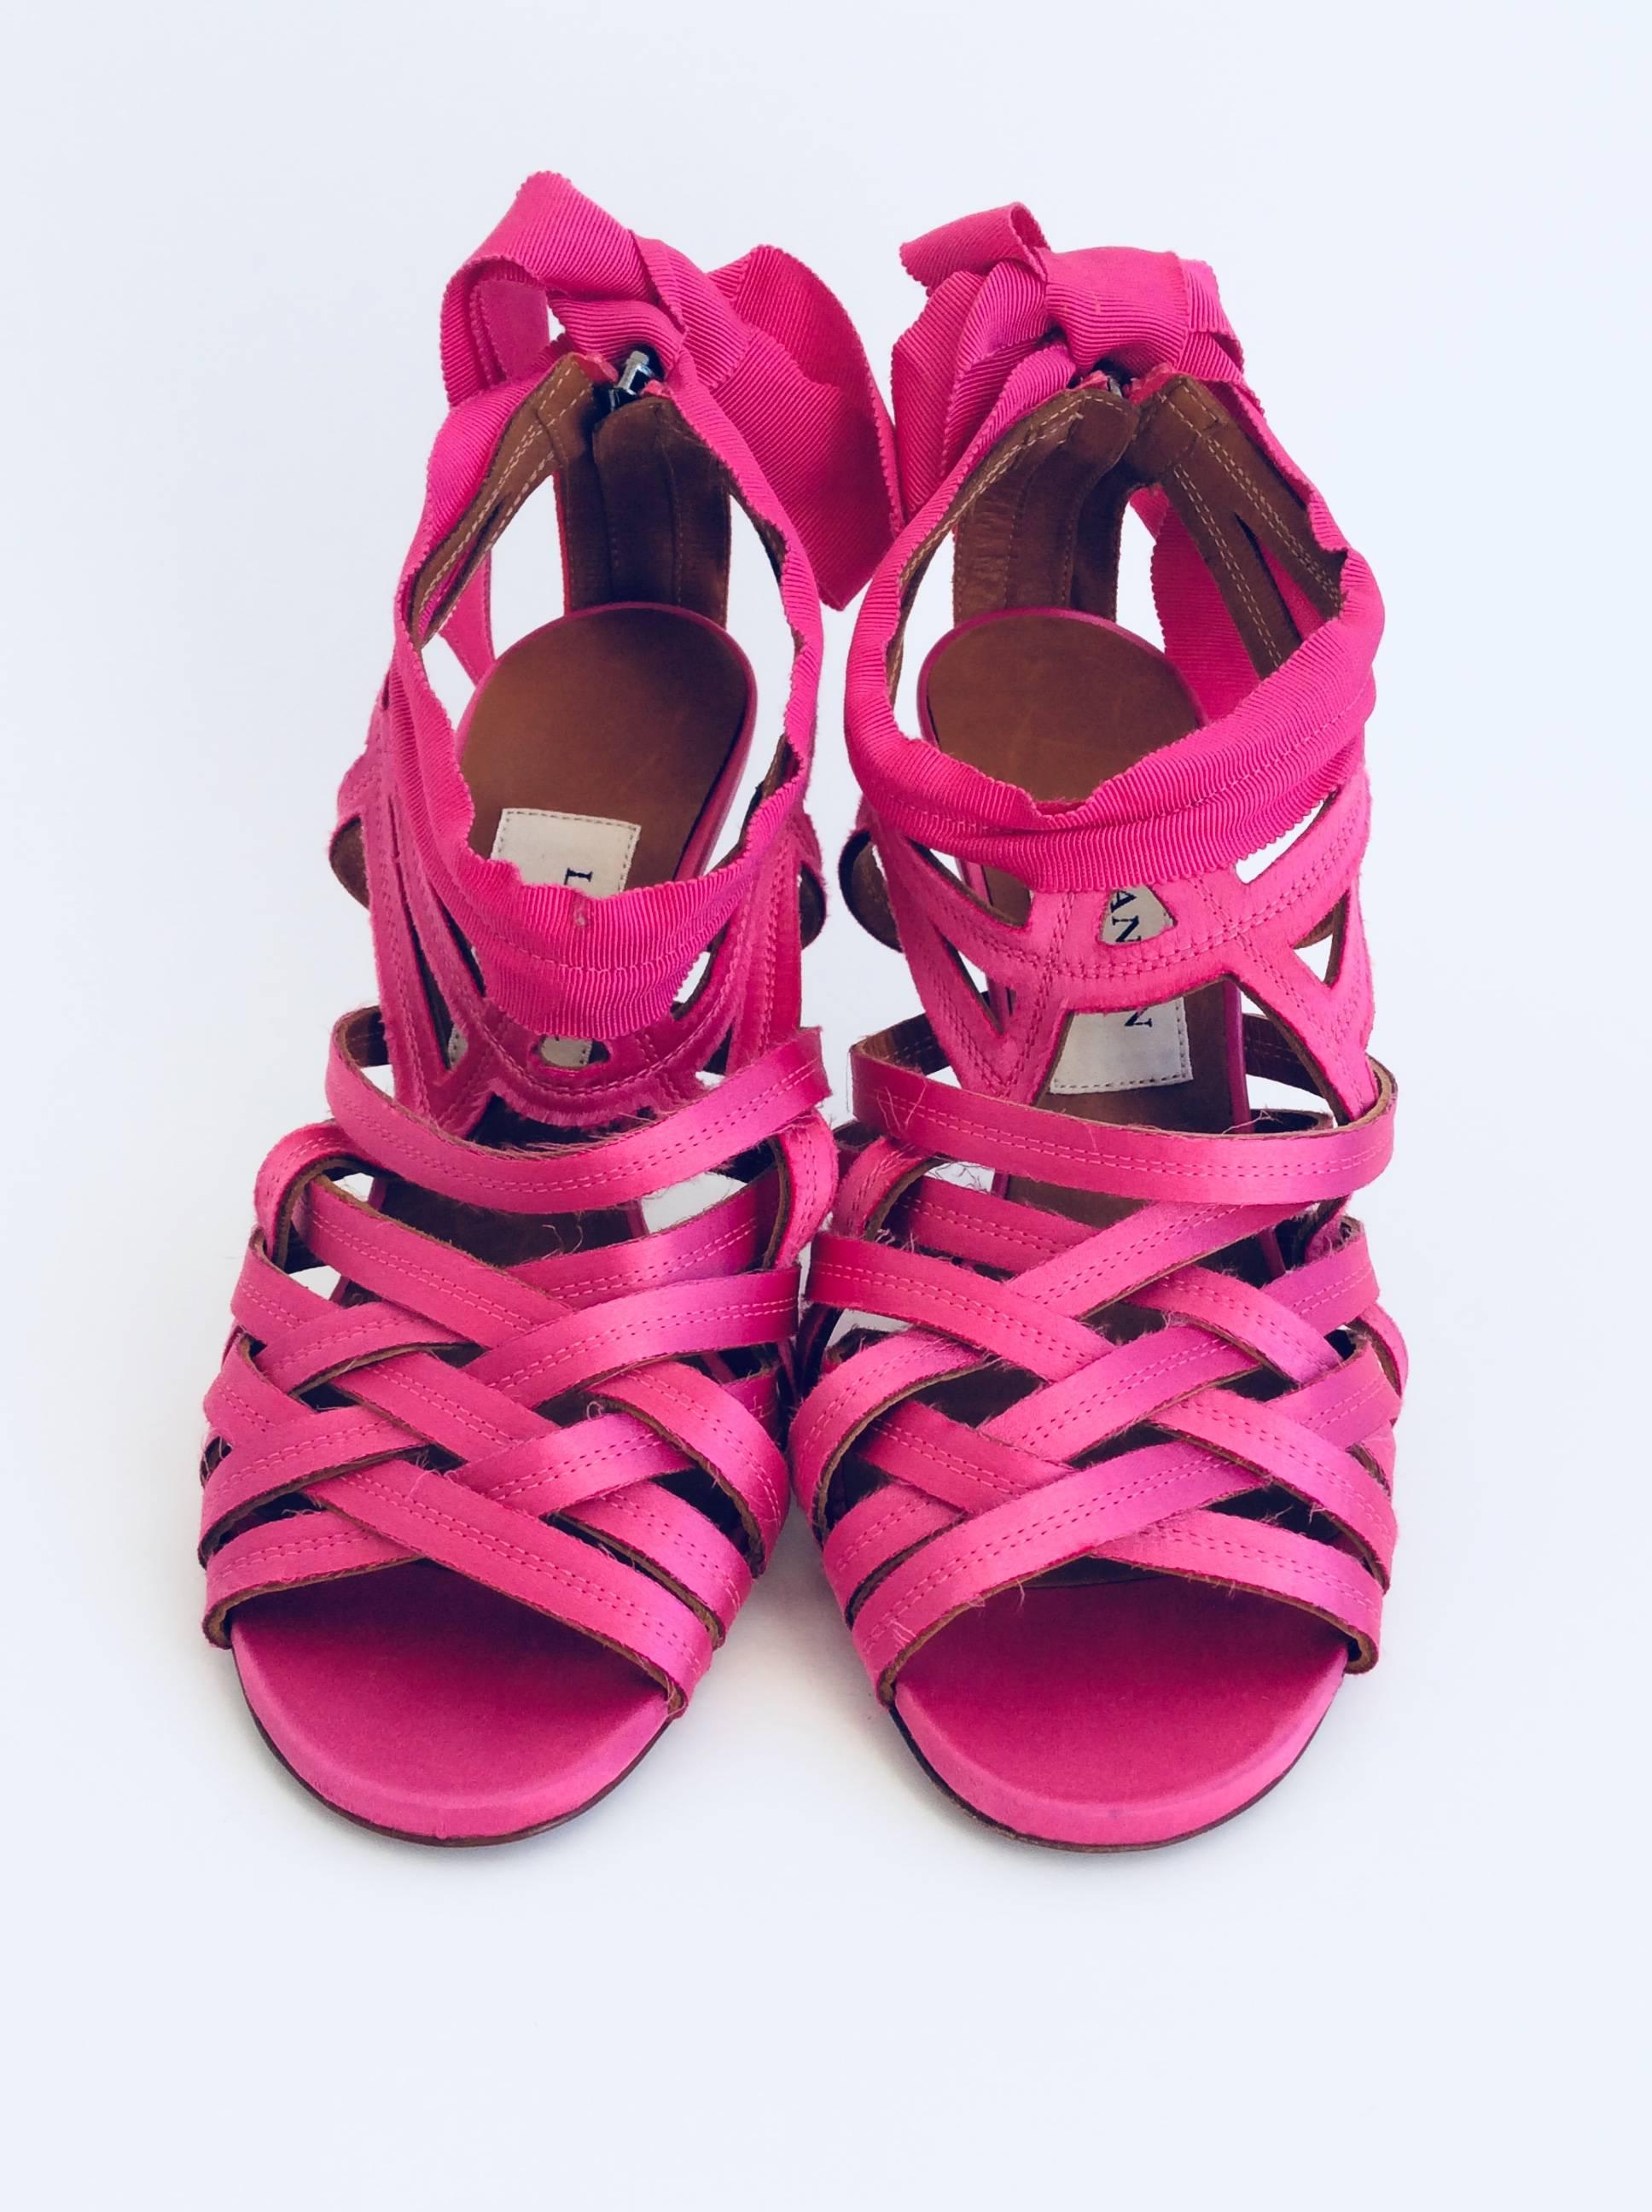 Lanvin candy pink sandals made with unfinished strips of satin a  gros grain ribbon that closes in a bow at the ankle. The height of the pewter metallic heel is 4in and they have a zipper in the back of 2 3/4in. 

Please note the shoes are sold as